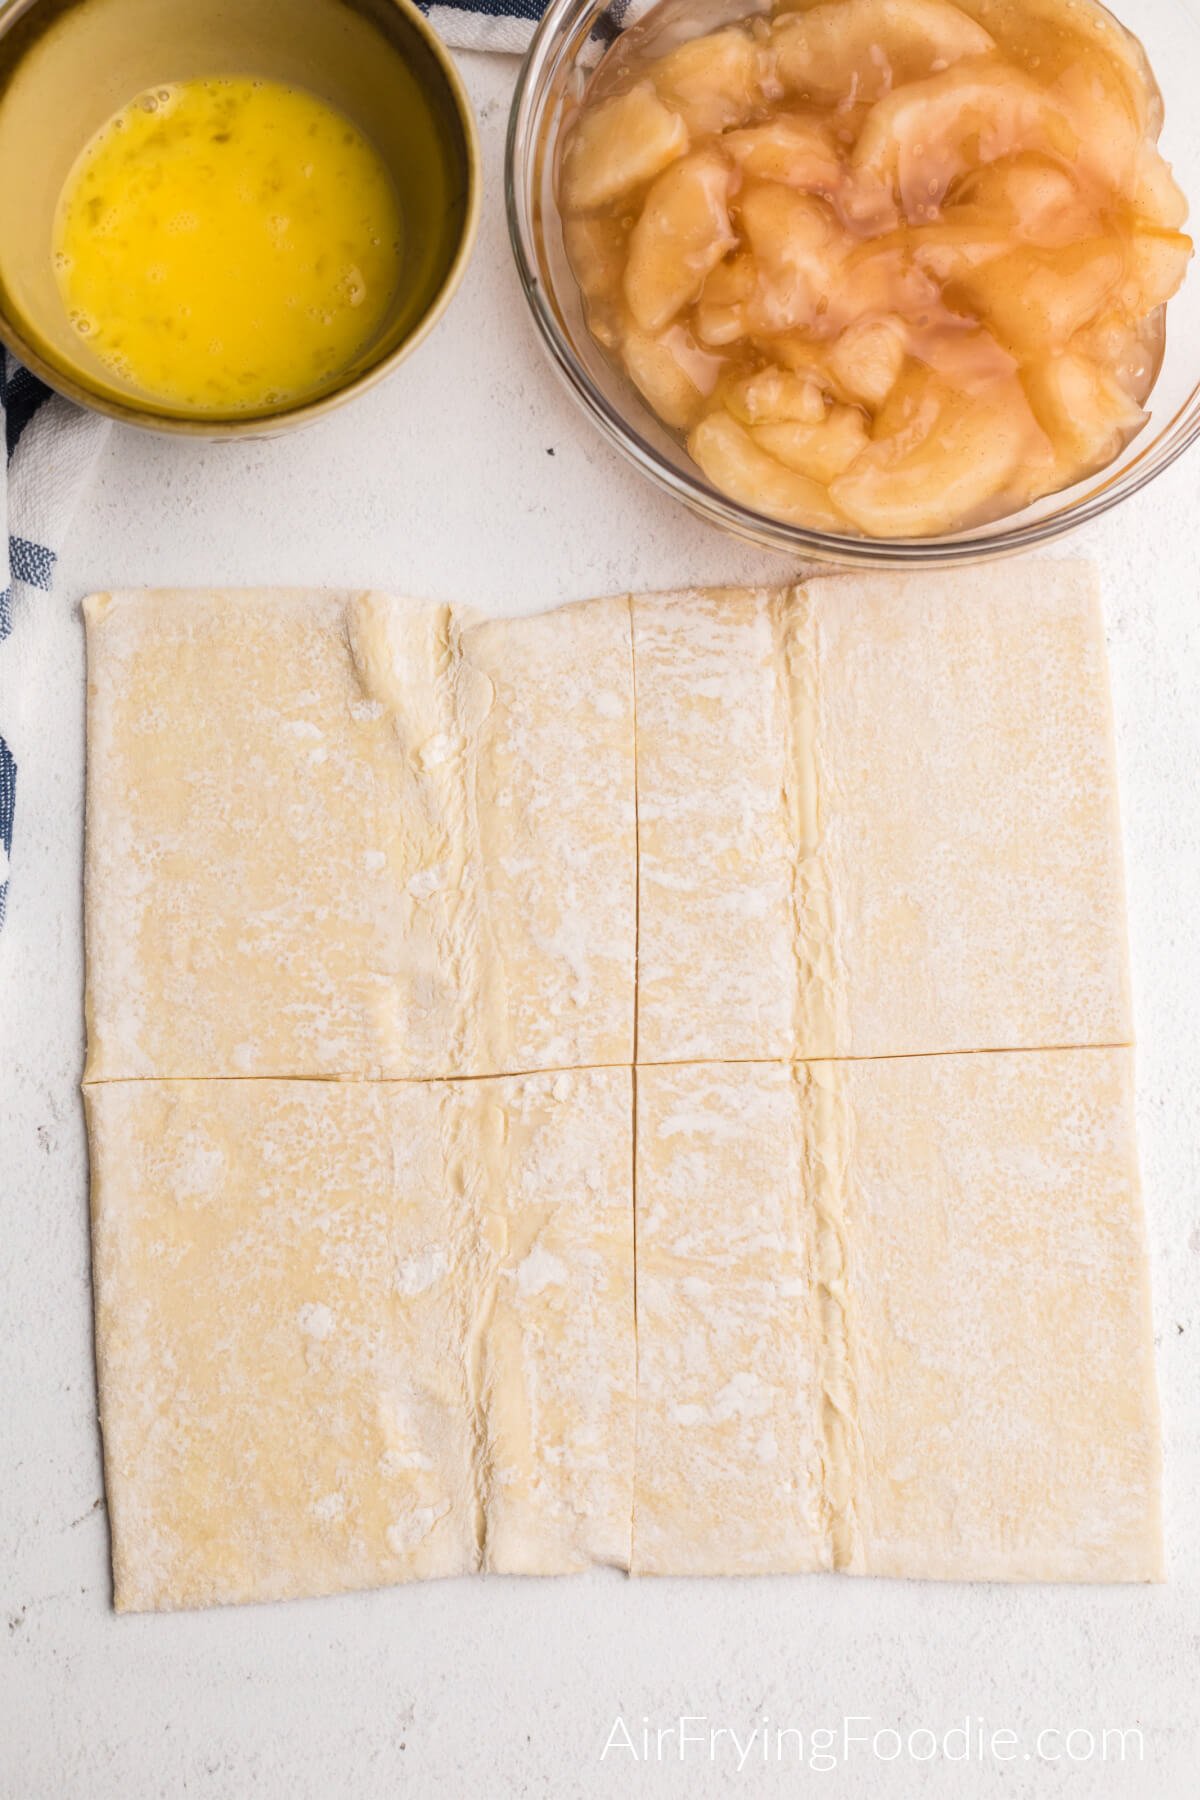 Puff pastry sheets cut into 4 squares, egg in a bowl, apple filling in a bowl. 